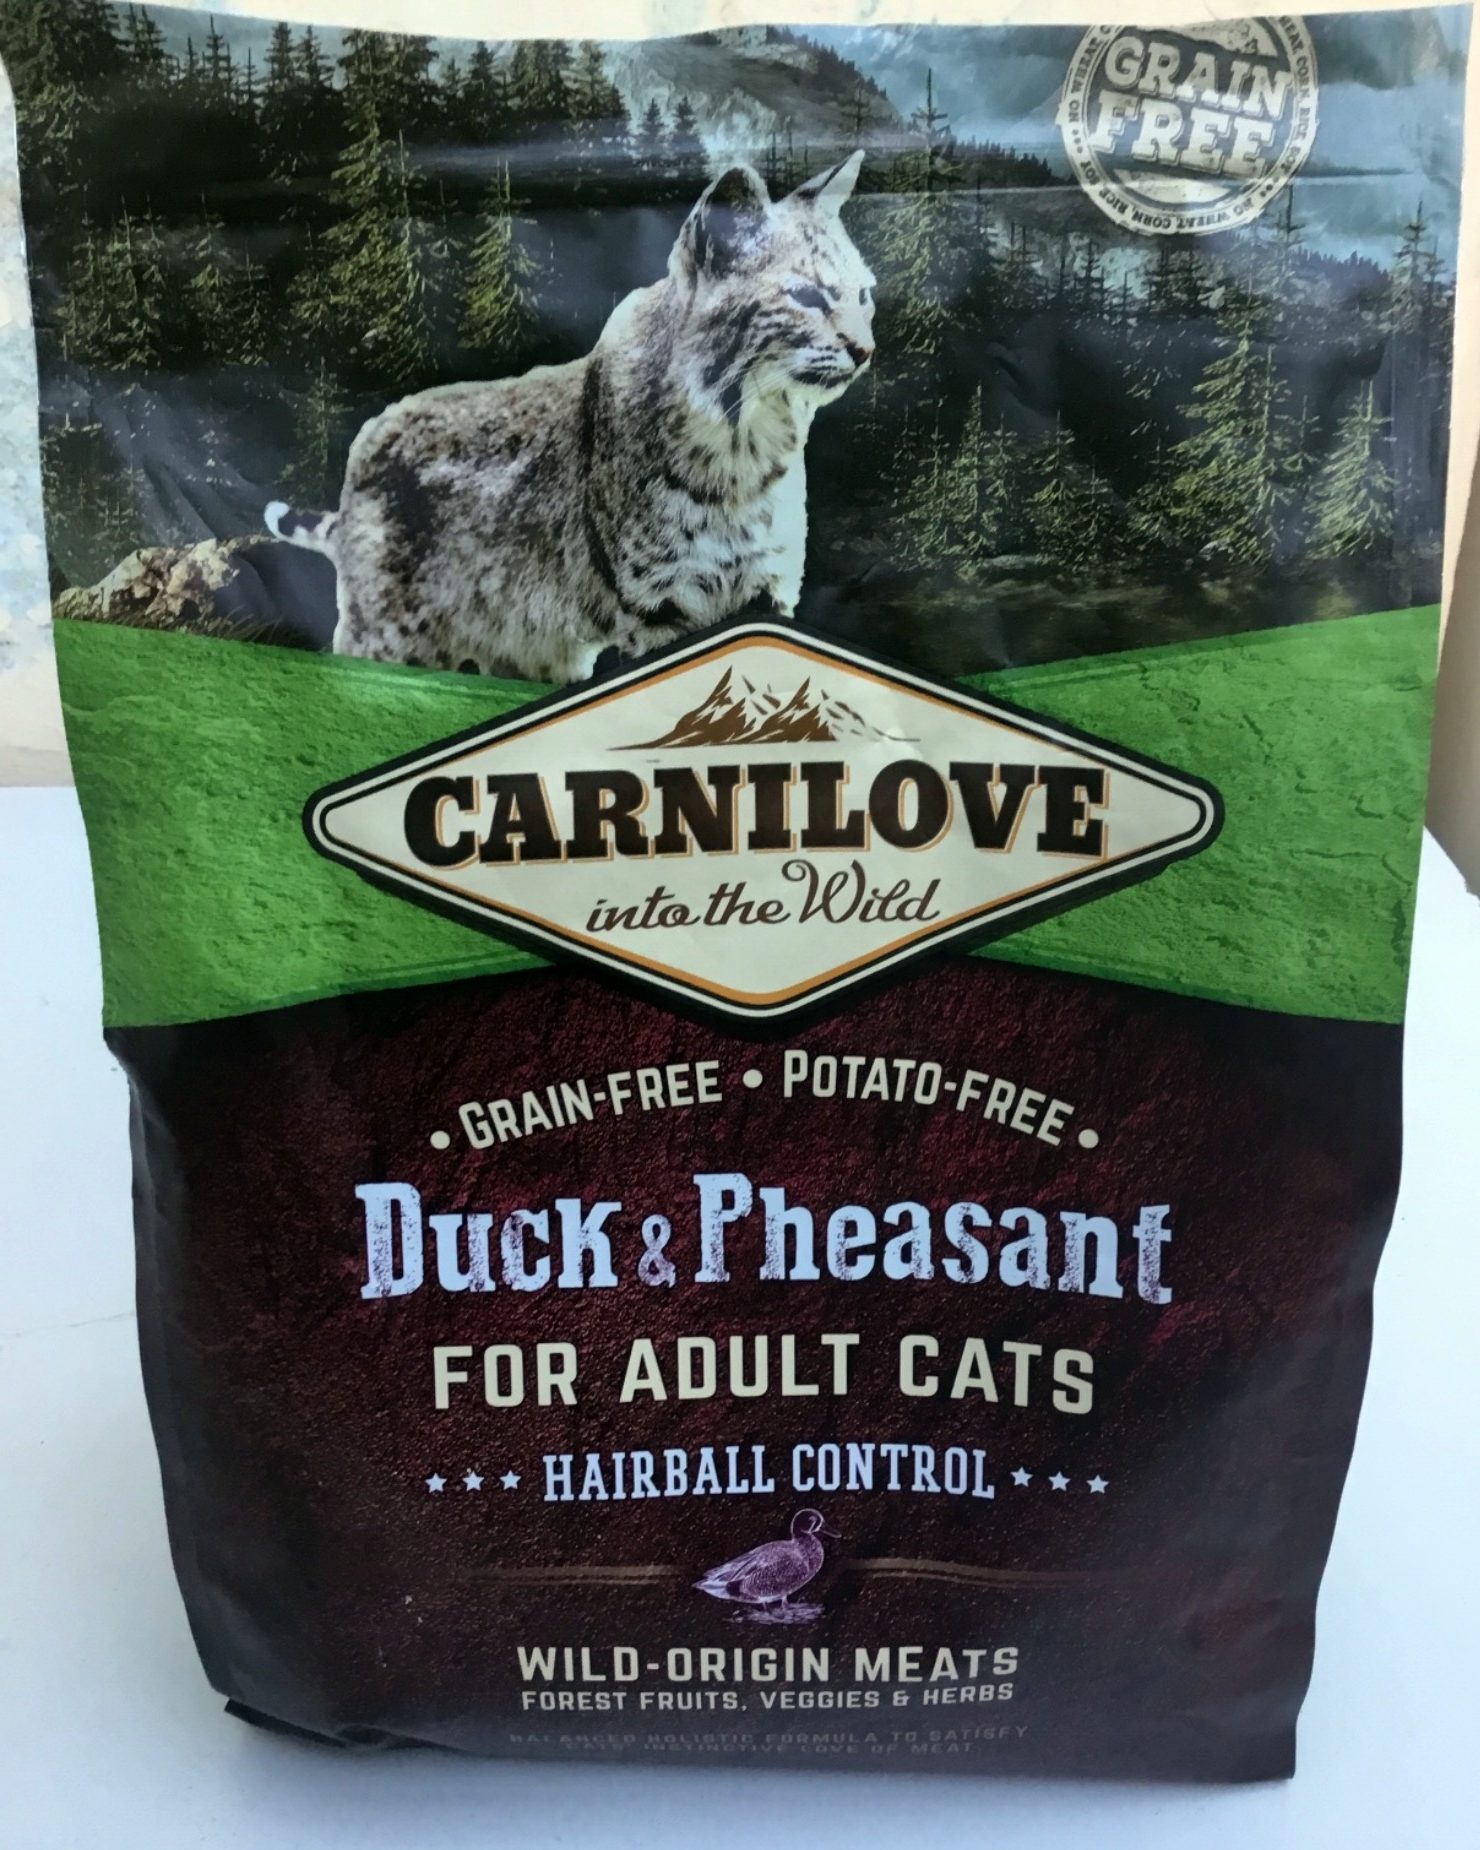 Duck and Pheasant for adult cats *** hairball control *** - Product - fr